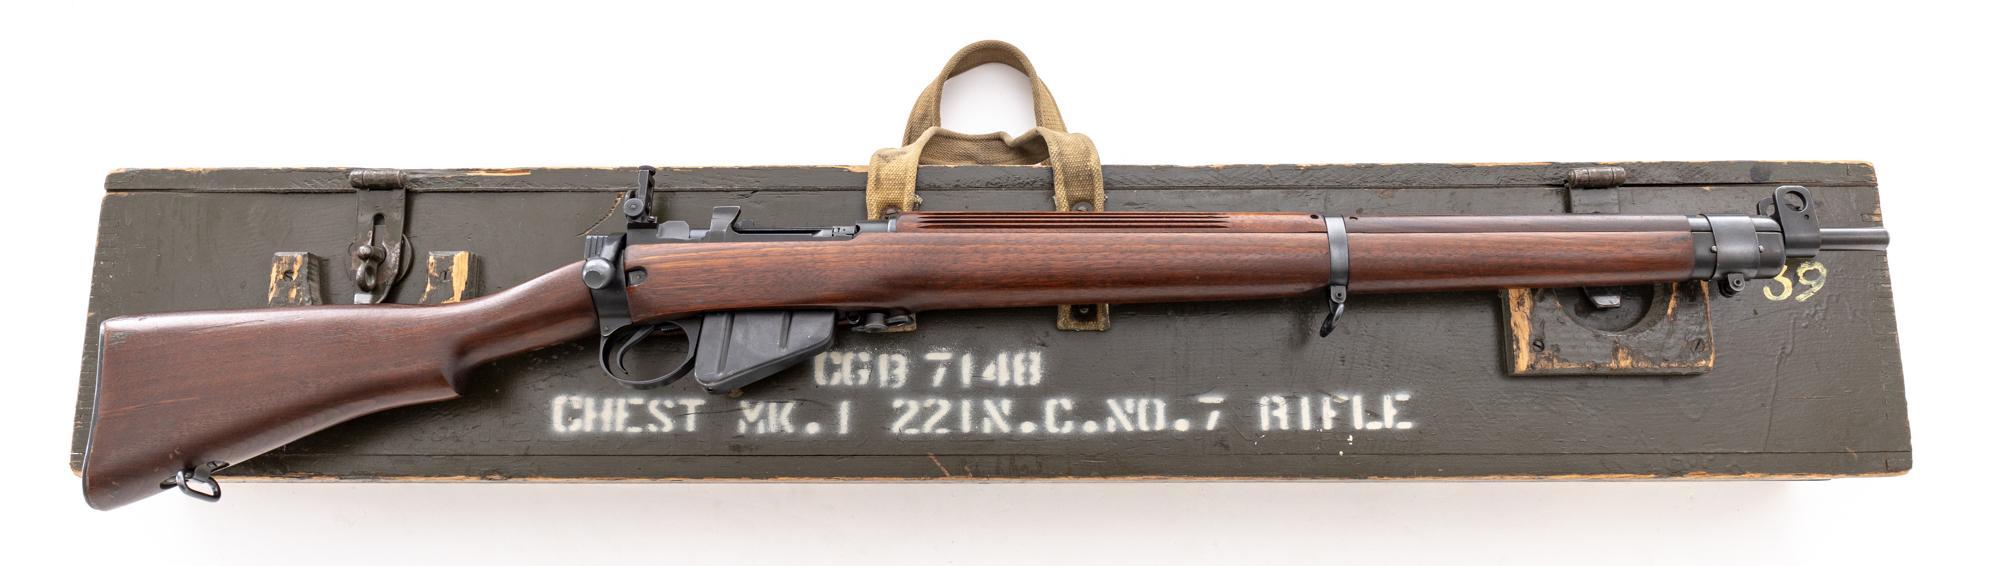 The Lee-Enfield SMLE Mk. III Rifle, Used By Canadians During The